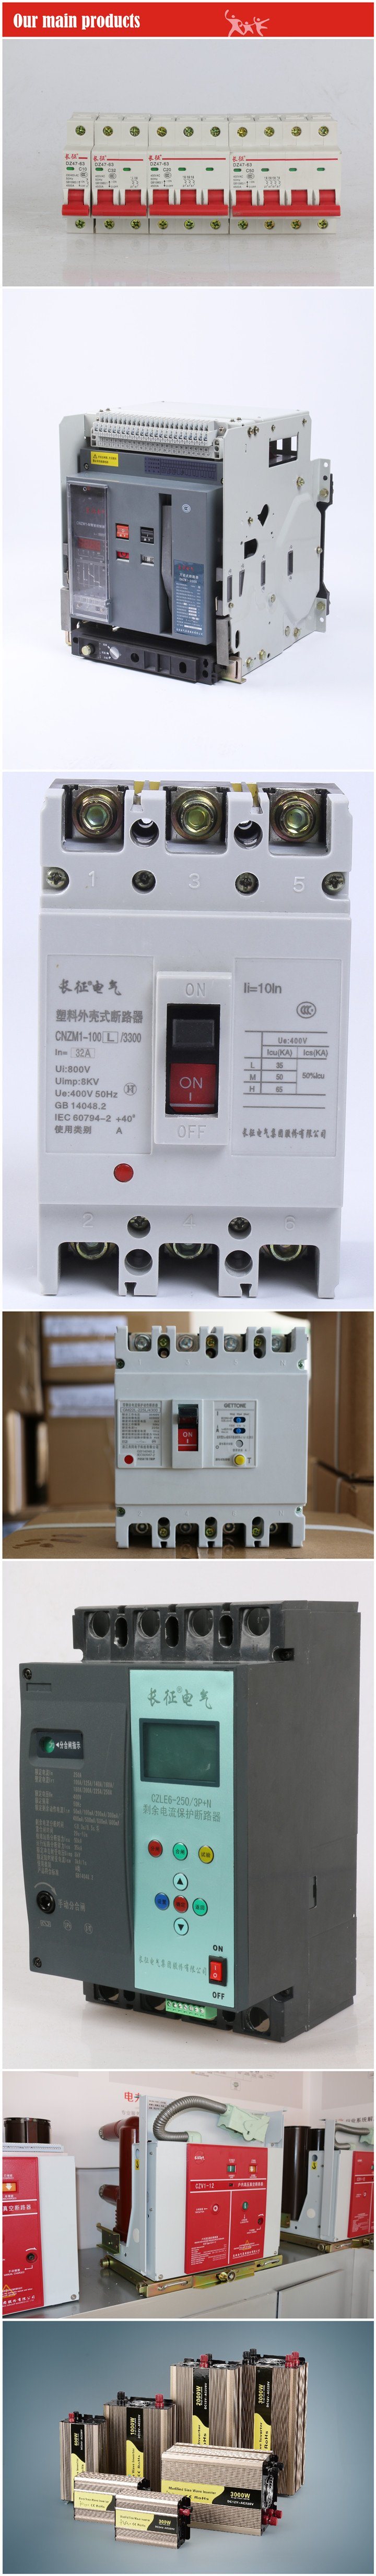 ATS Wats 1000A Dual Driver Dual Power Supply Automatic Transfer Switch for Circuit Breaker MCB RCCB